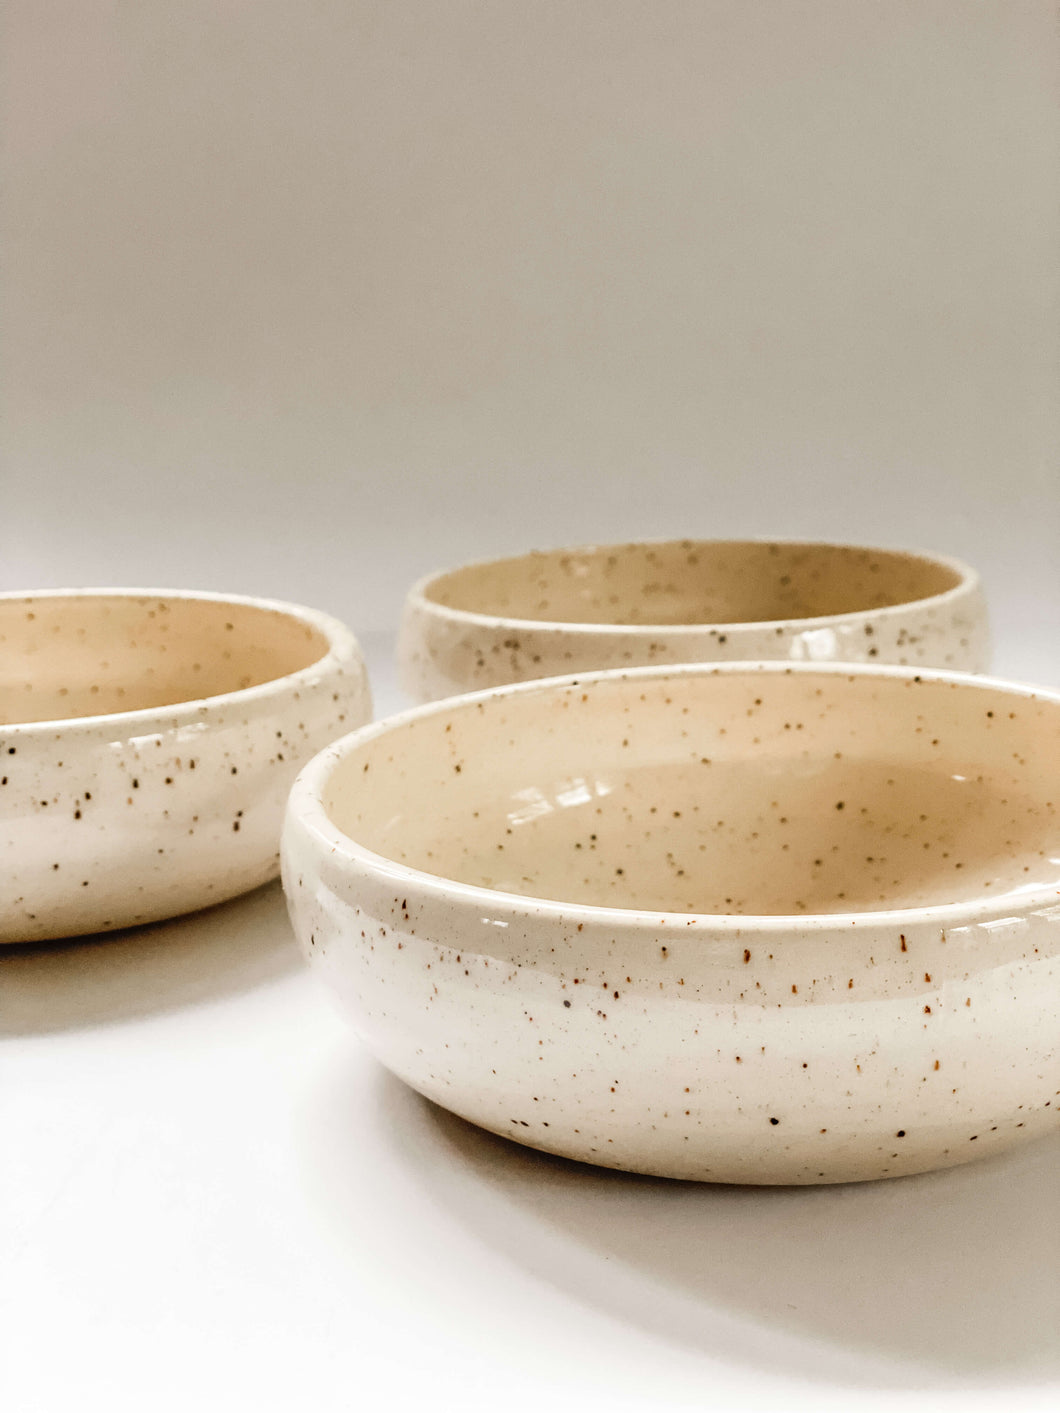 Low profile bowls wheel thrown in a cream and brown speckled clay